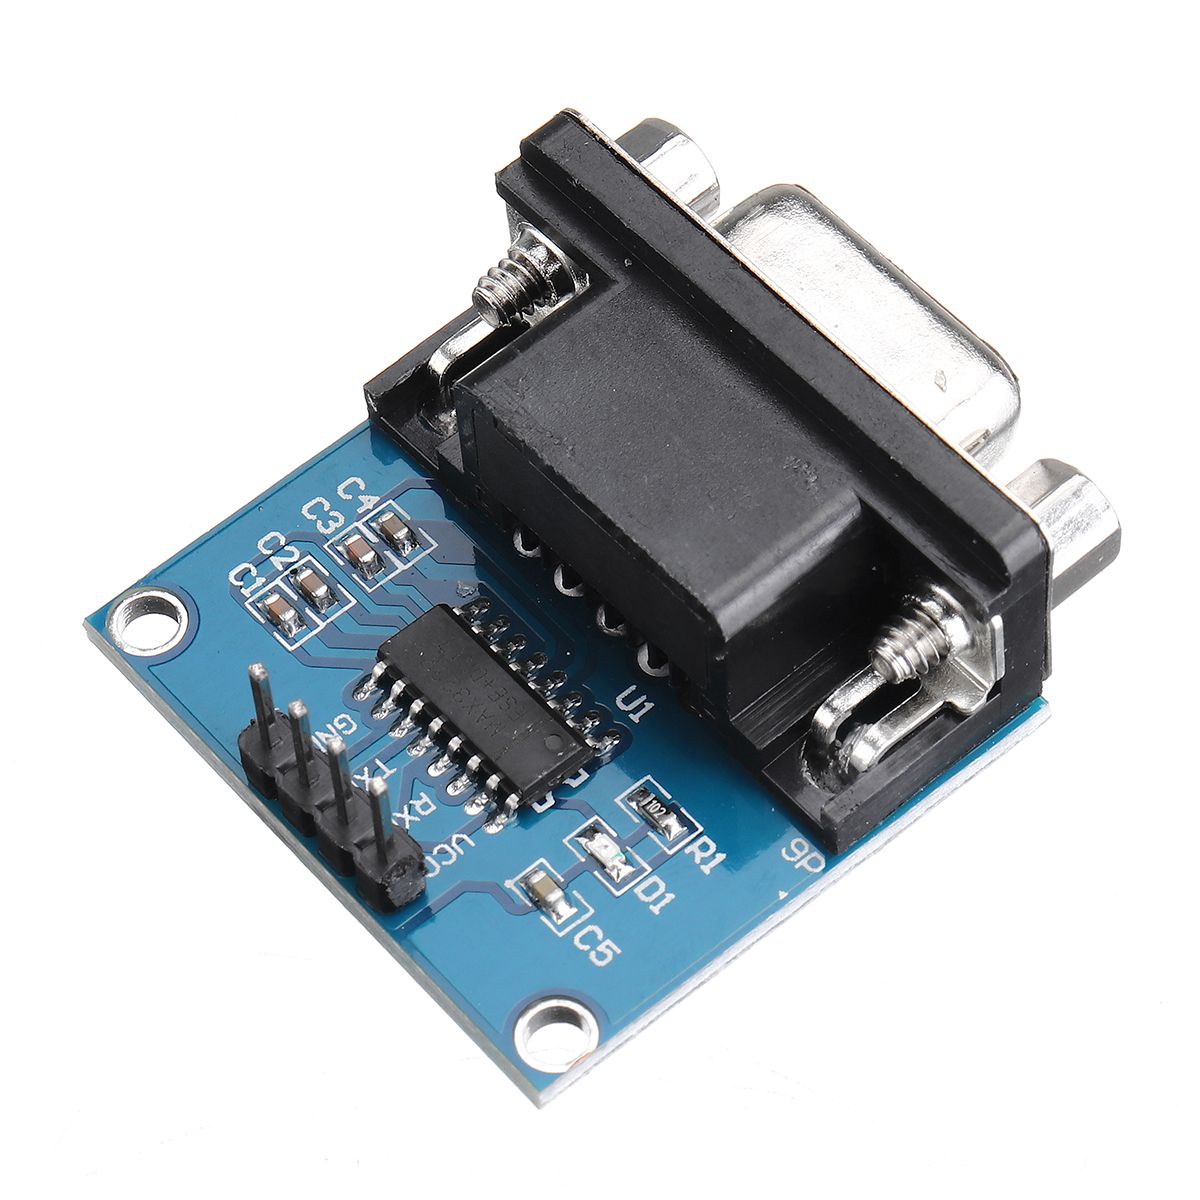 5pcs-RS232-to-TTL-Serial-Port-Converter-Module-DB9-Connector-MAX3232-Serial-Module-1527330